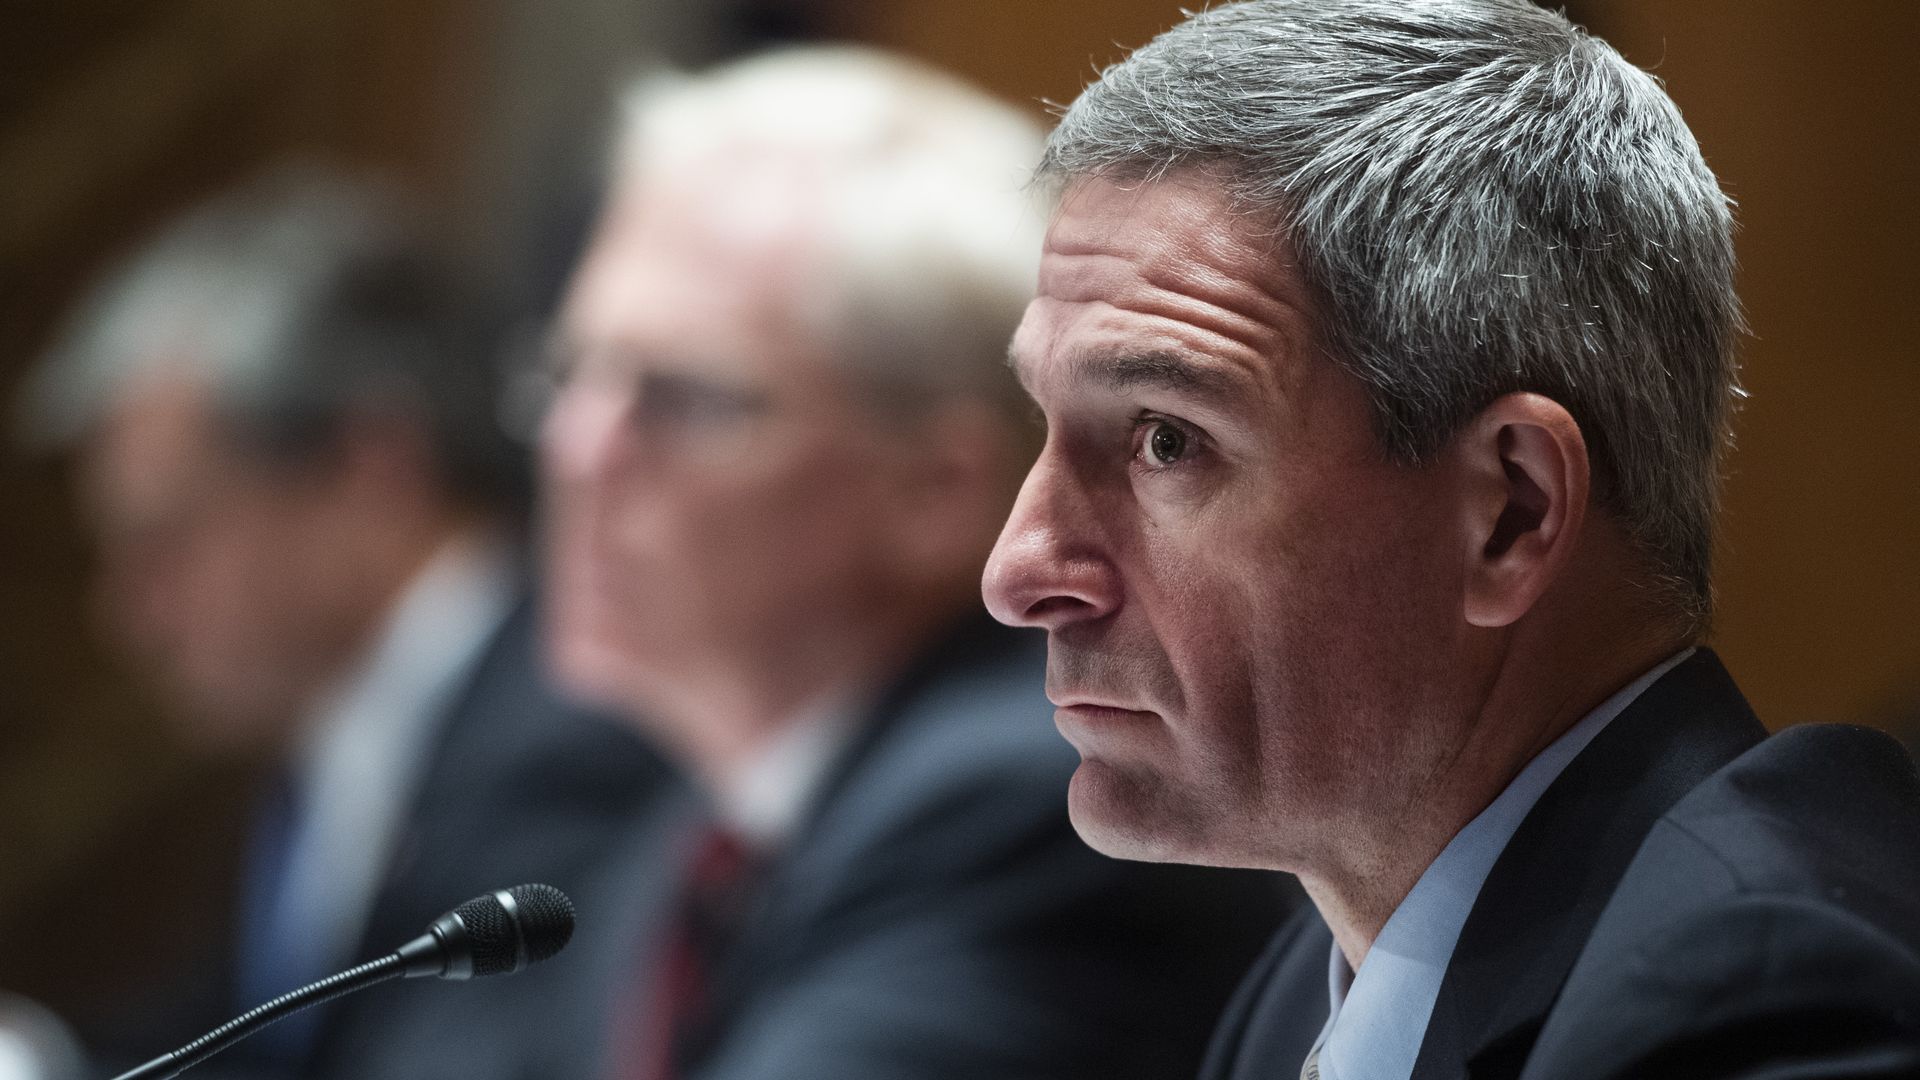 Kenneth Cuccinelli, senior official performing the duties of the deputy secretary for the DHS testifies during Senate Homeland Security and Governmental Affairs Committee hearing 